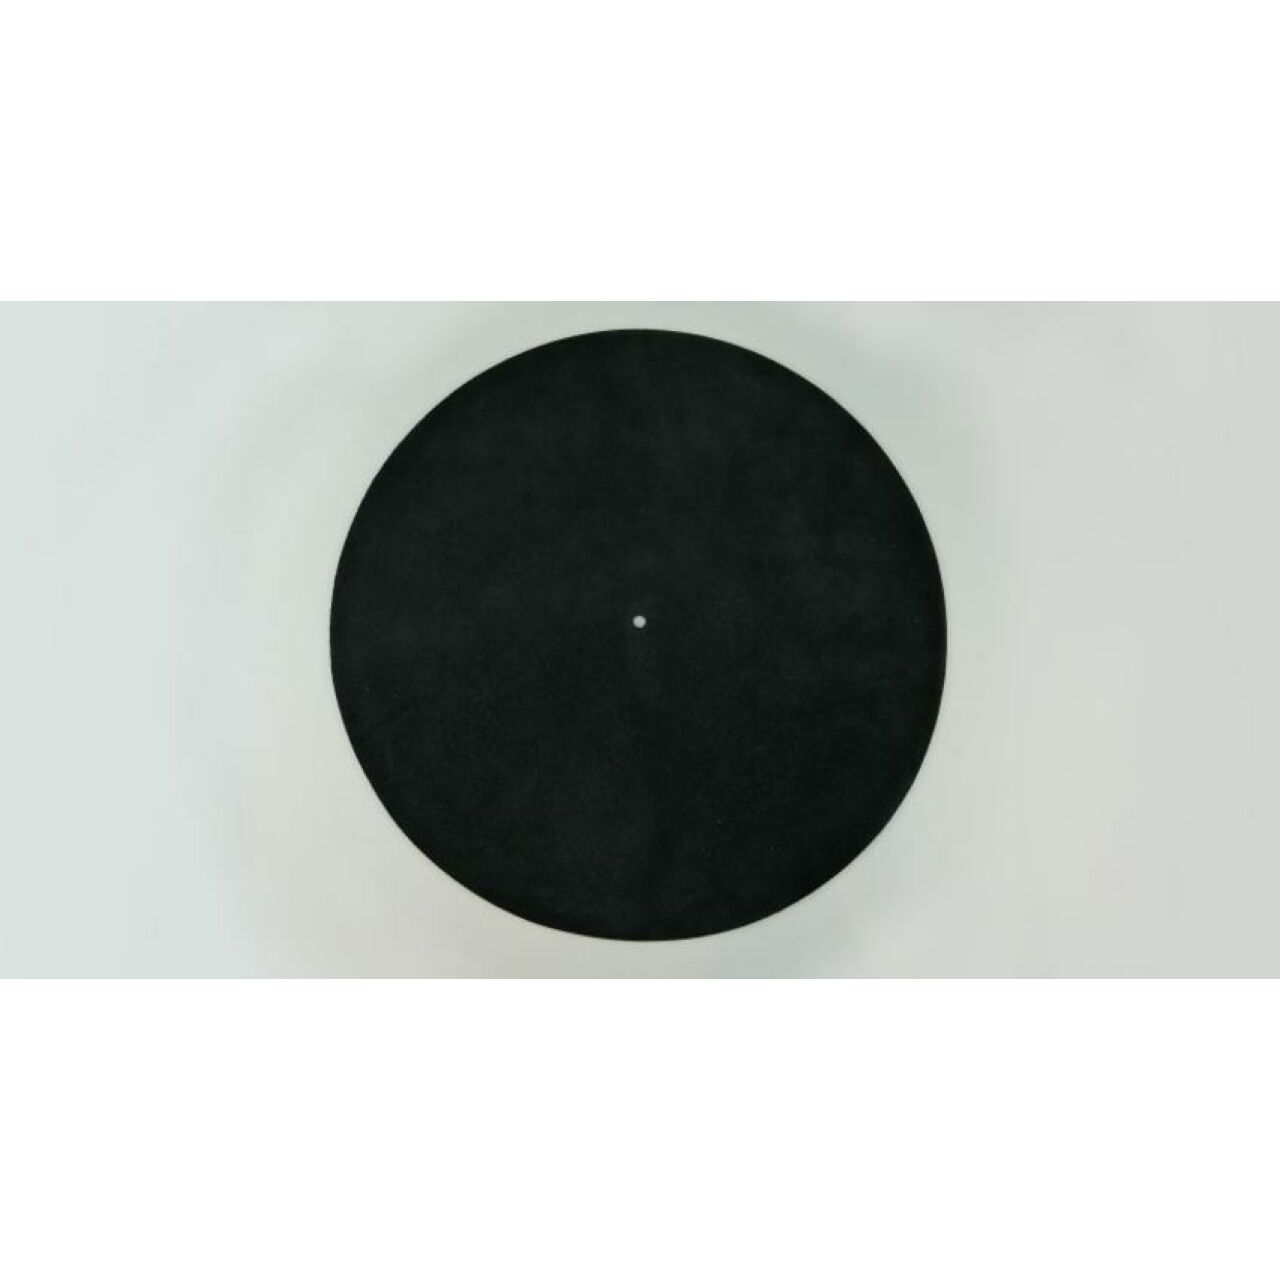 Simply Analog Turntable Slipmat Soft Touch